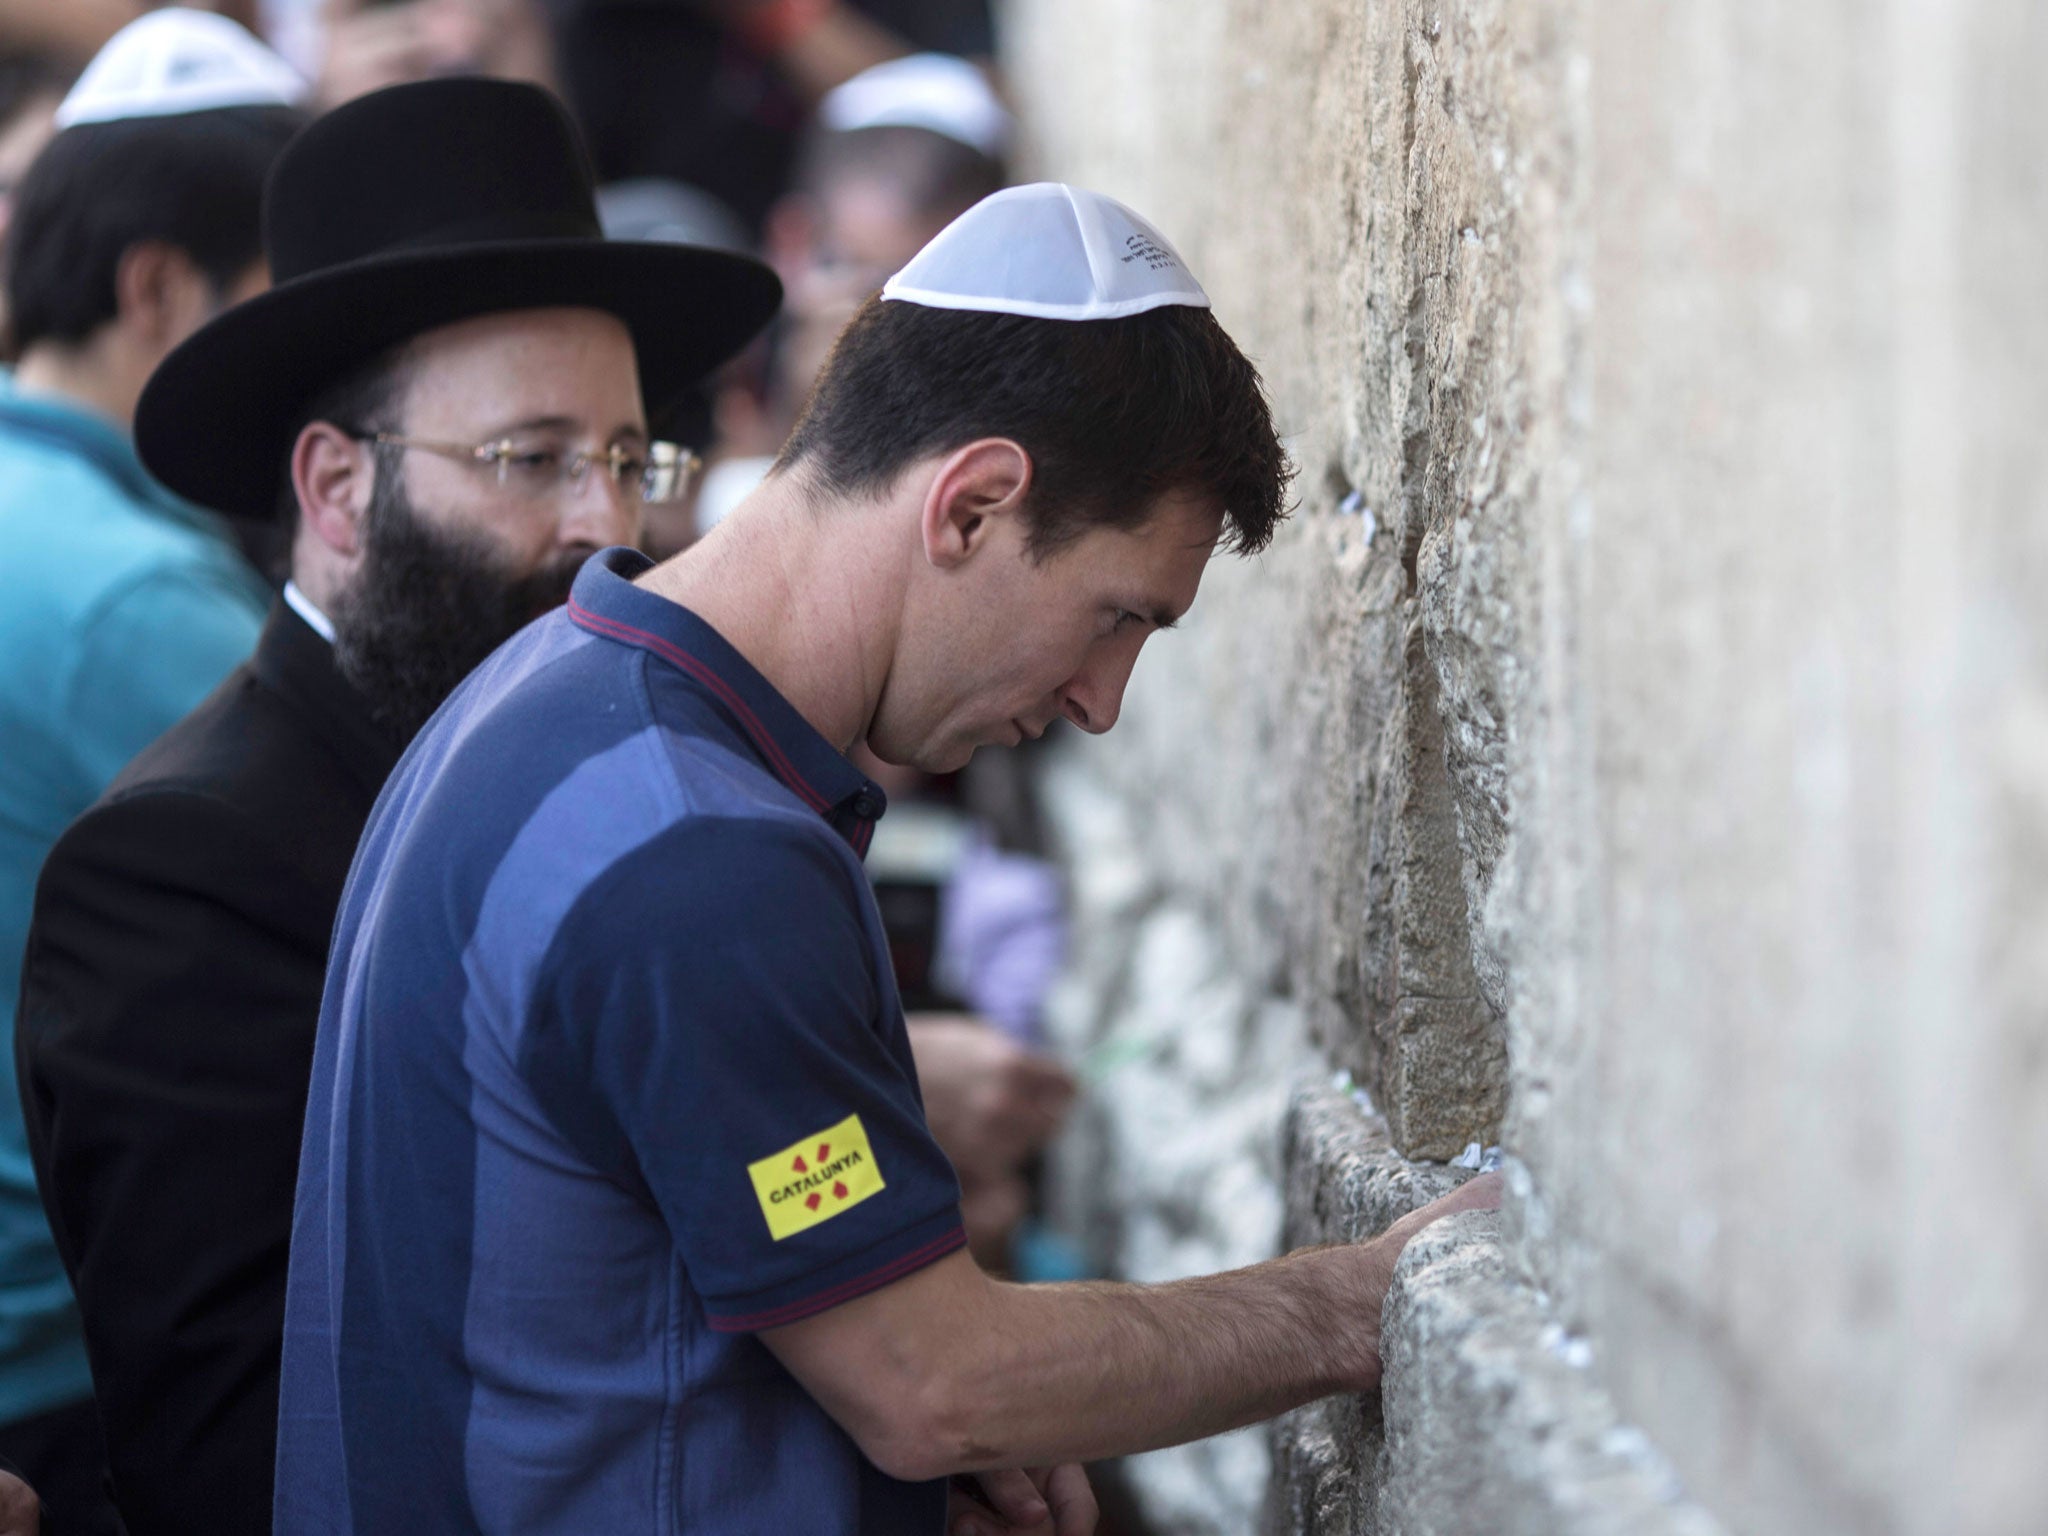 Barcelona footballer Lionel Messi places a wish on Jerusalem’s Western Wall